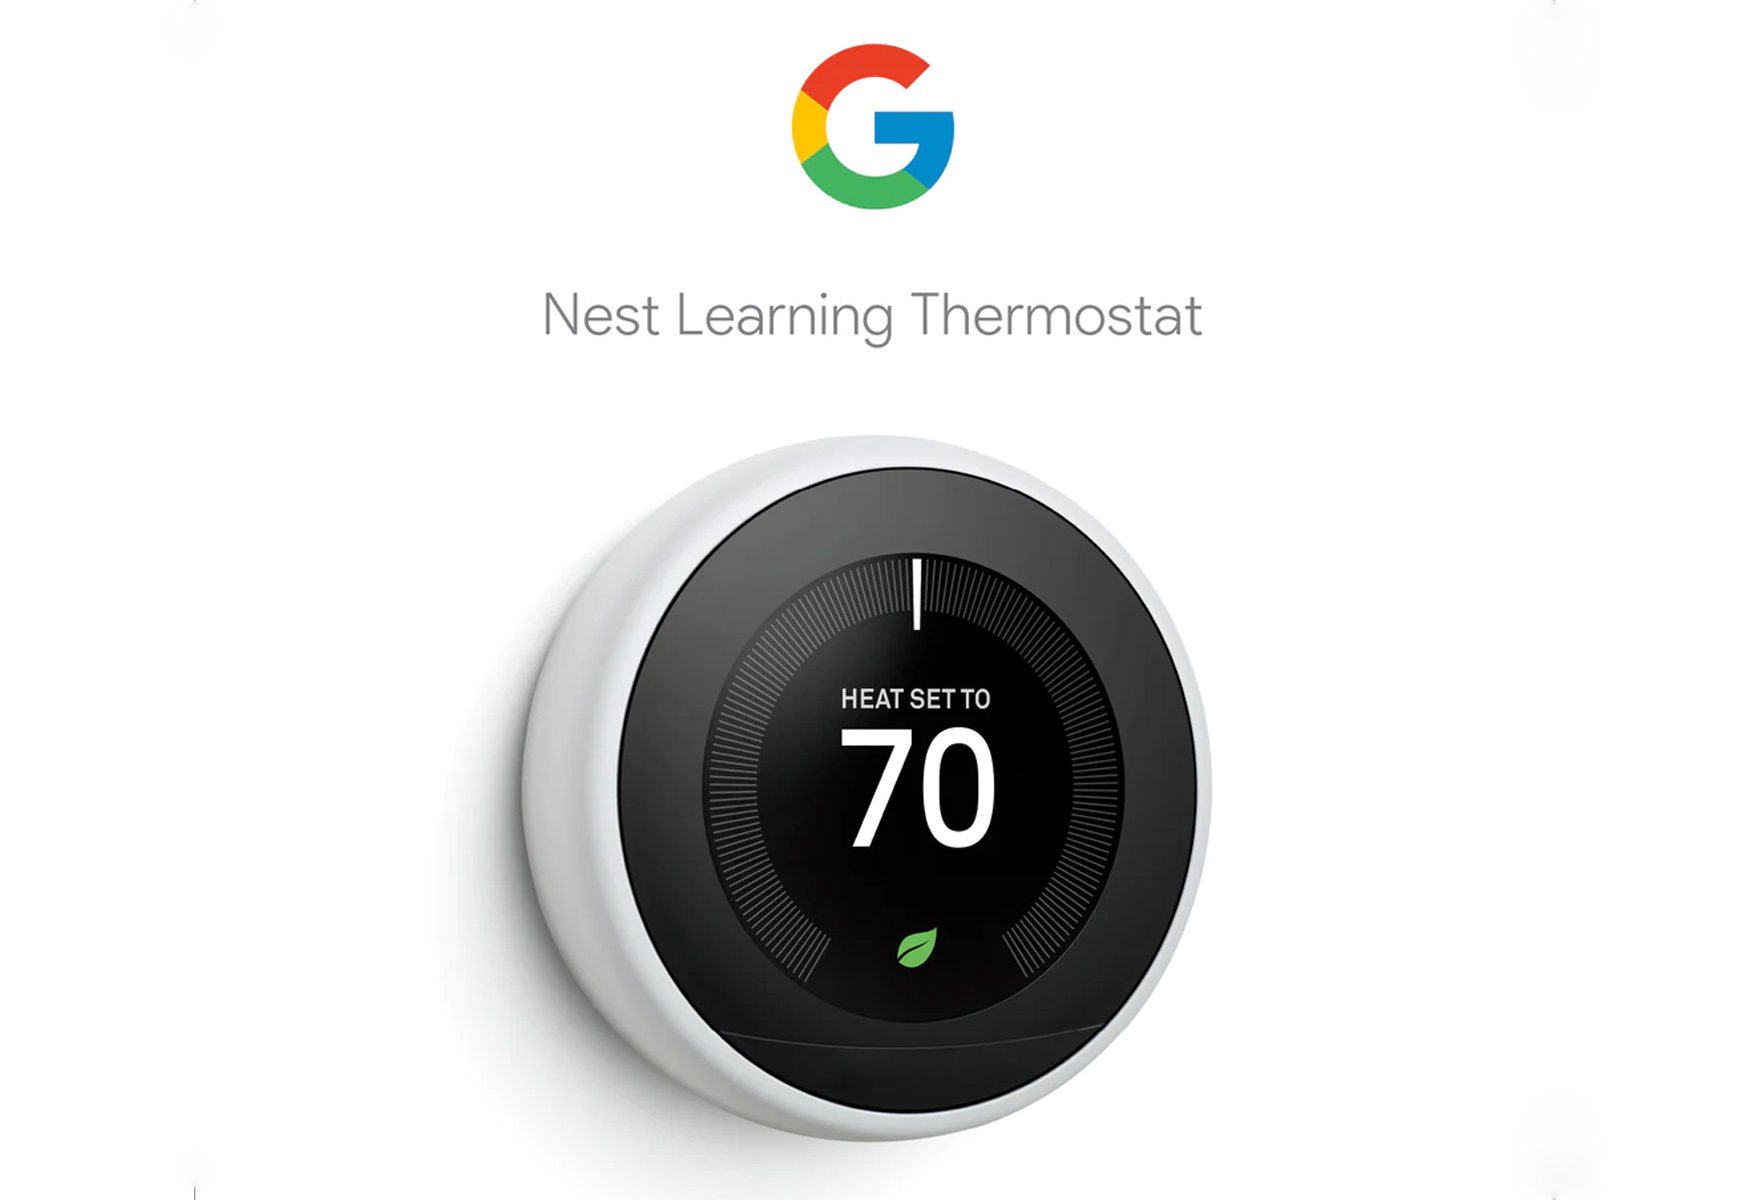 renew-home-emerges-as-google-nest-renew-and-ohmconnect-merge-with-100m-sip-investment